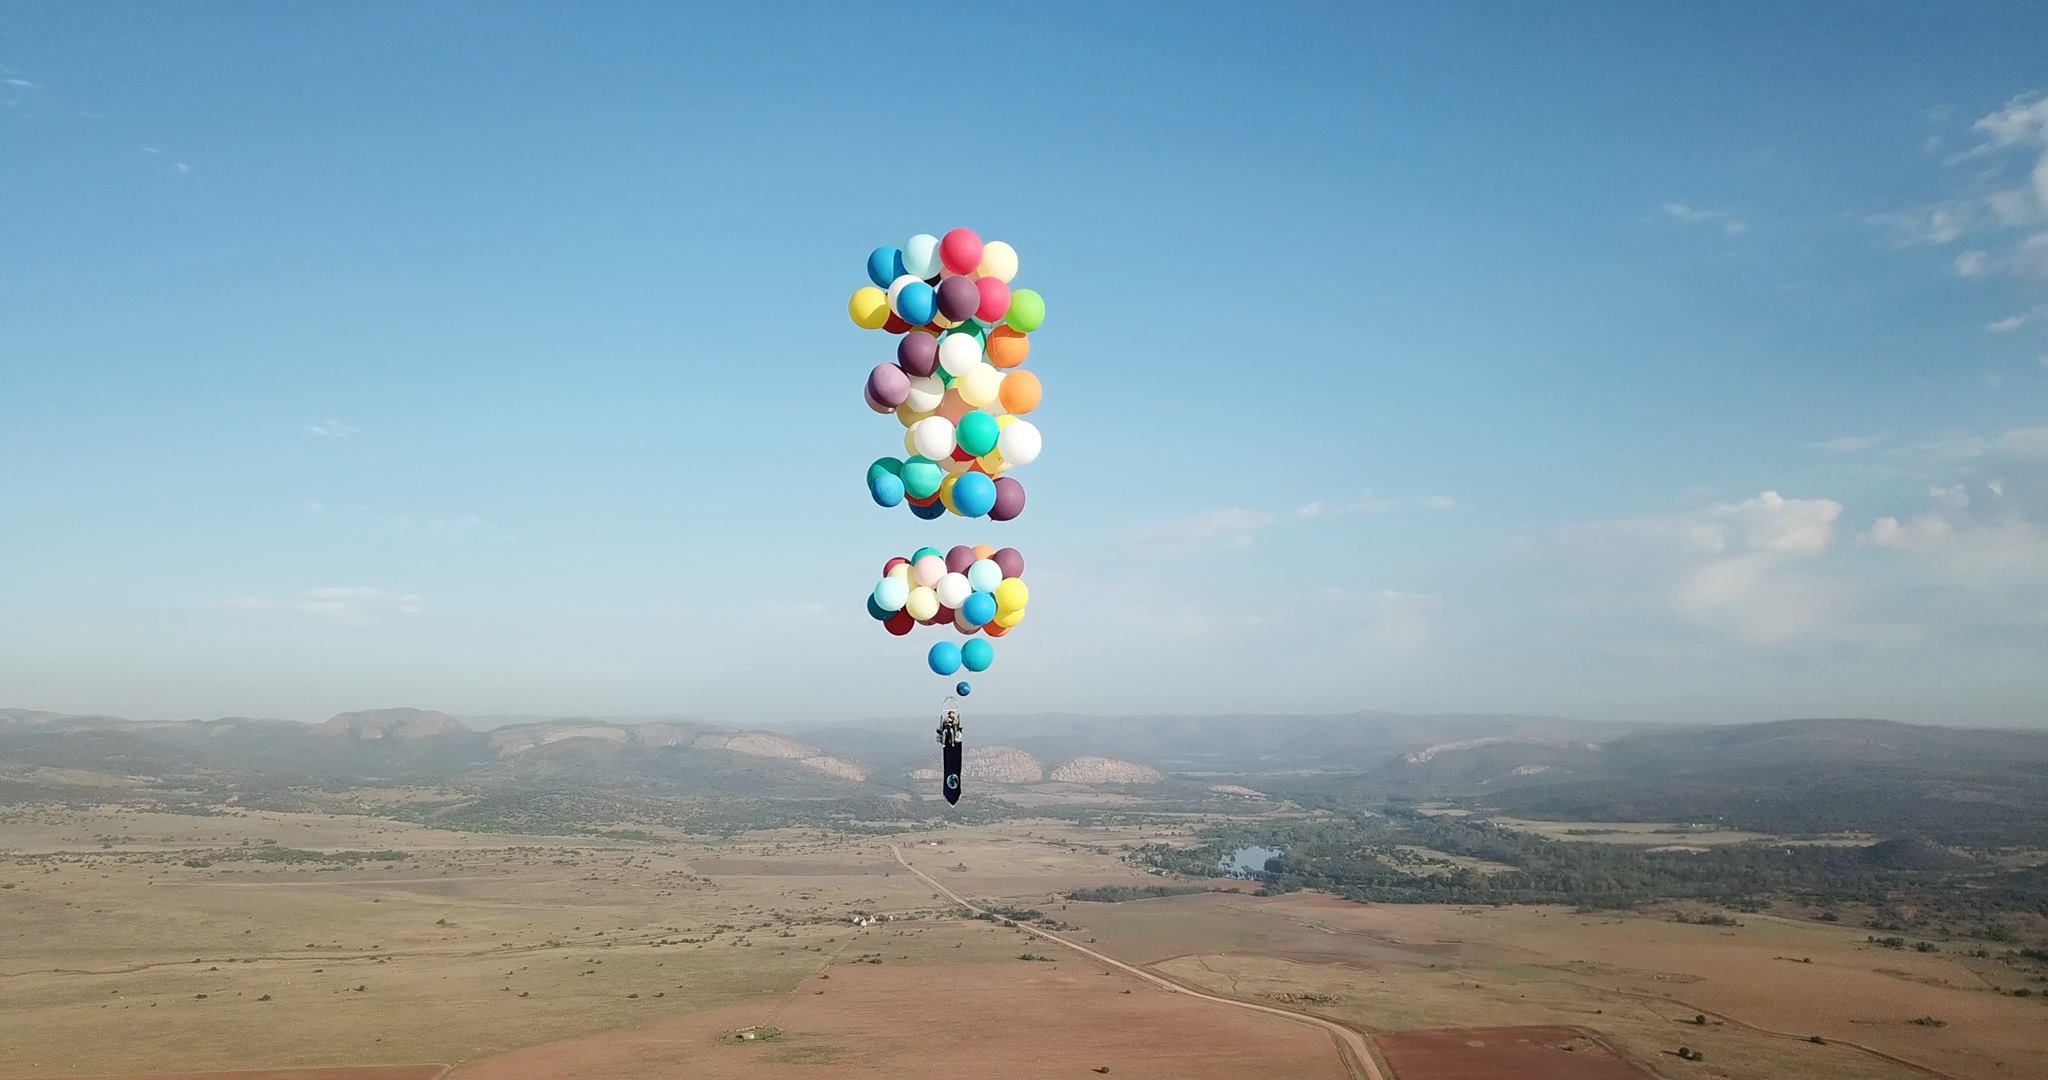 Man Strapped To 100 Helium Balloons Flies 8 000 Feet Up In The Air Images, Photos, Reviews